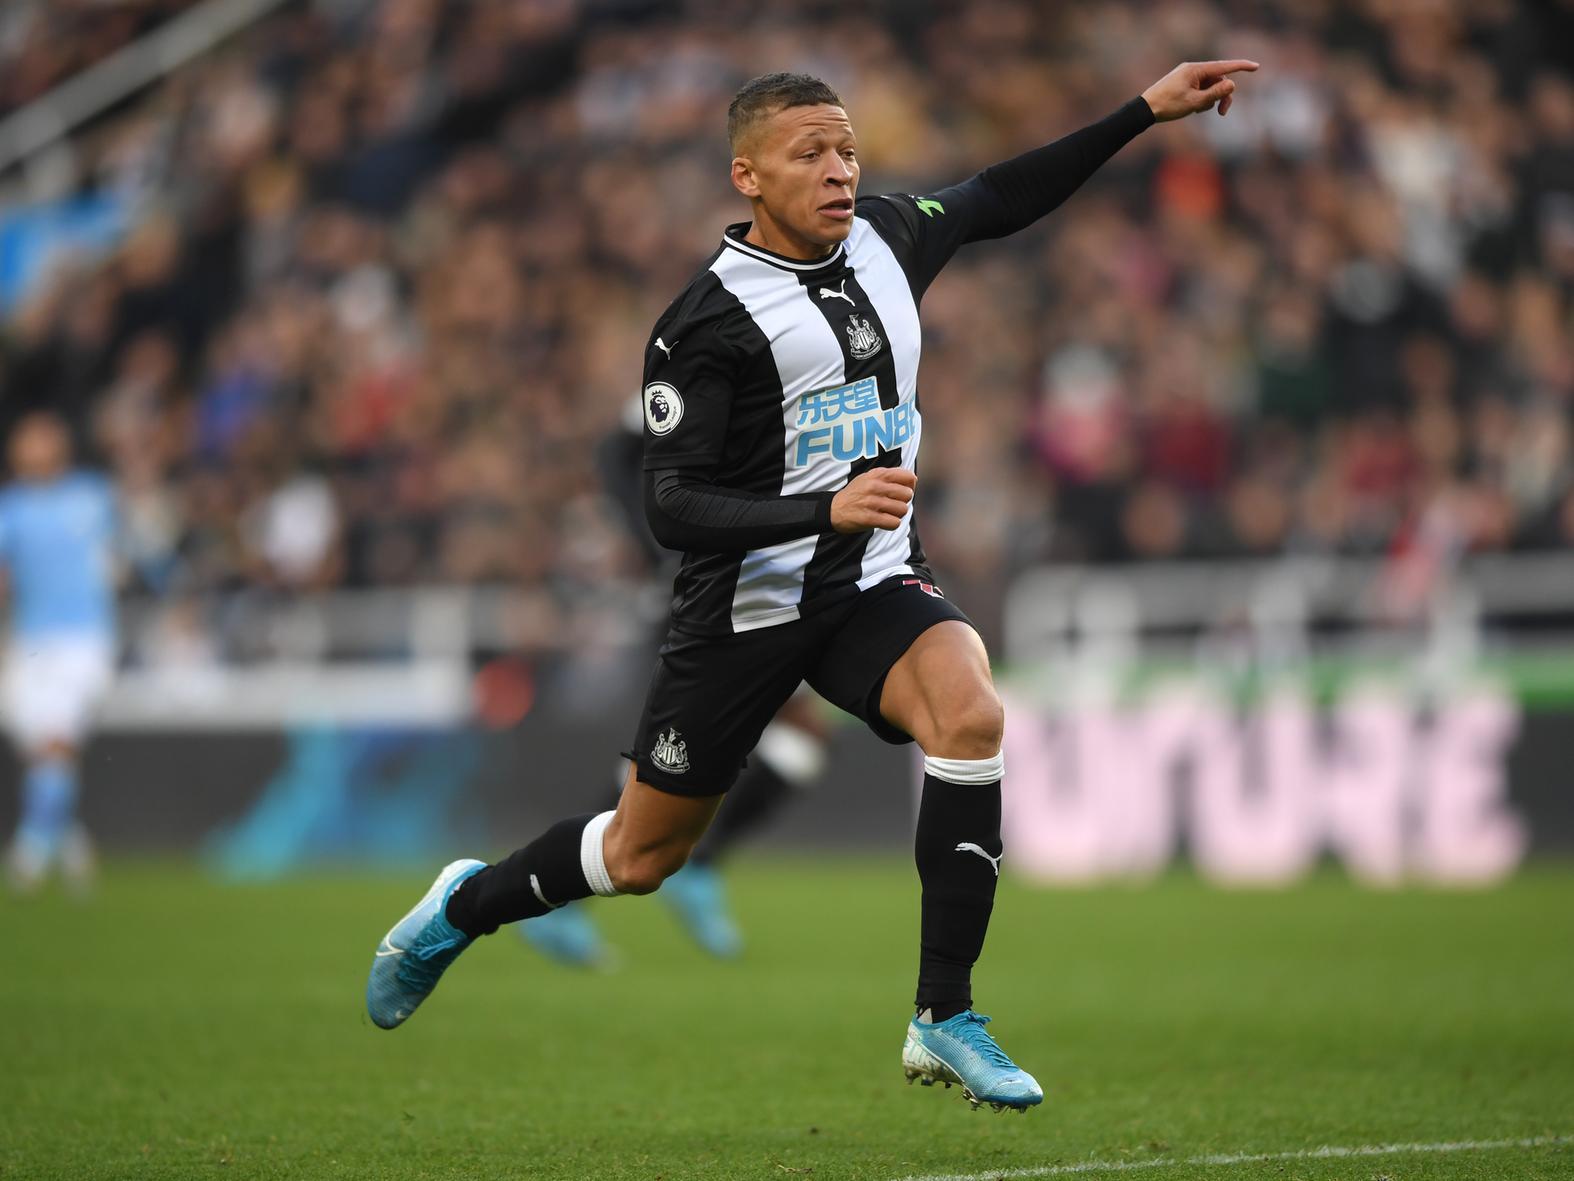 Nottingham Forest have receiveda boost in their attempts to sign Newcastle United's 20m-rated striker Dwight Gayle, after Aston Villa pulled out of the race to secure his services. (Telegraph)